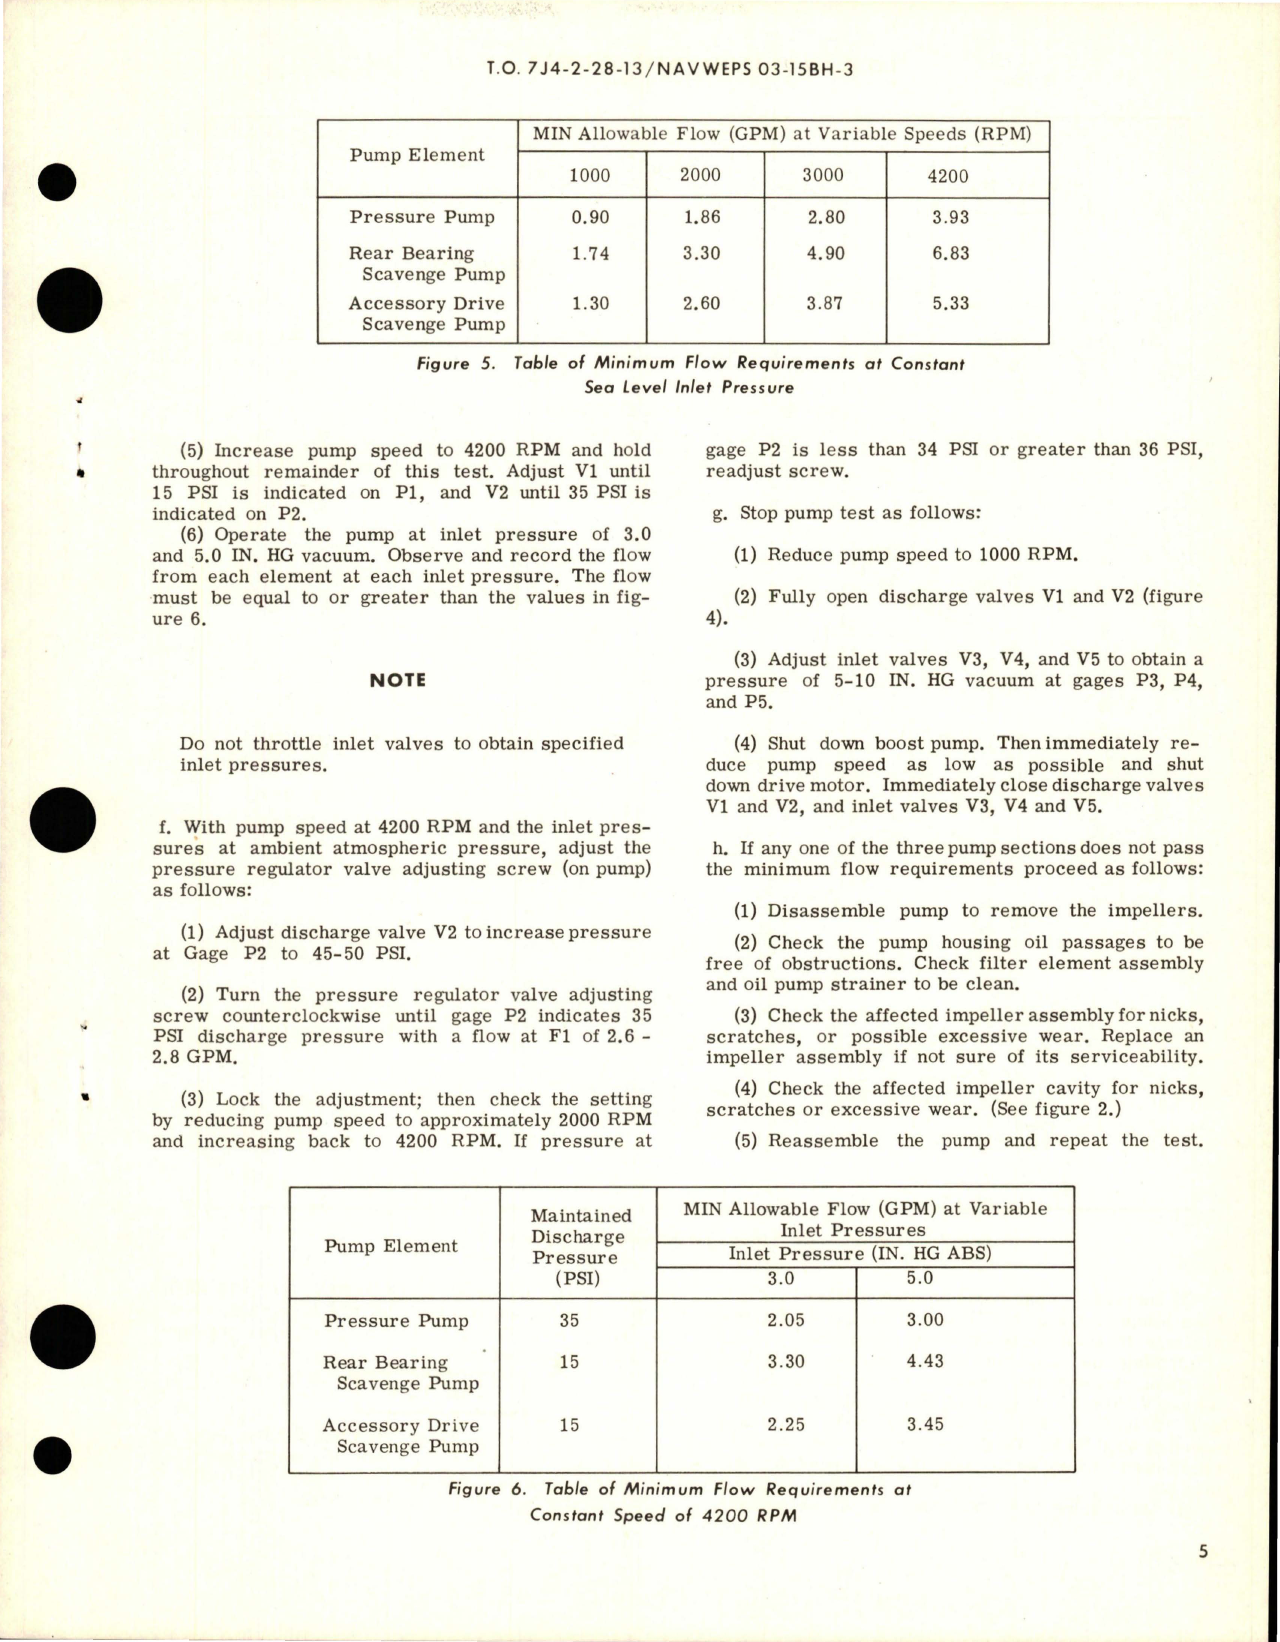 Sample page 5 from AirCorps Library document: Overhaul with Parts Breakdown for Oil Pump Assembly - Parts 577340 and 700813